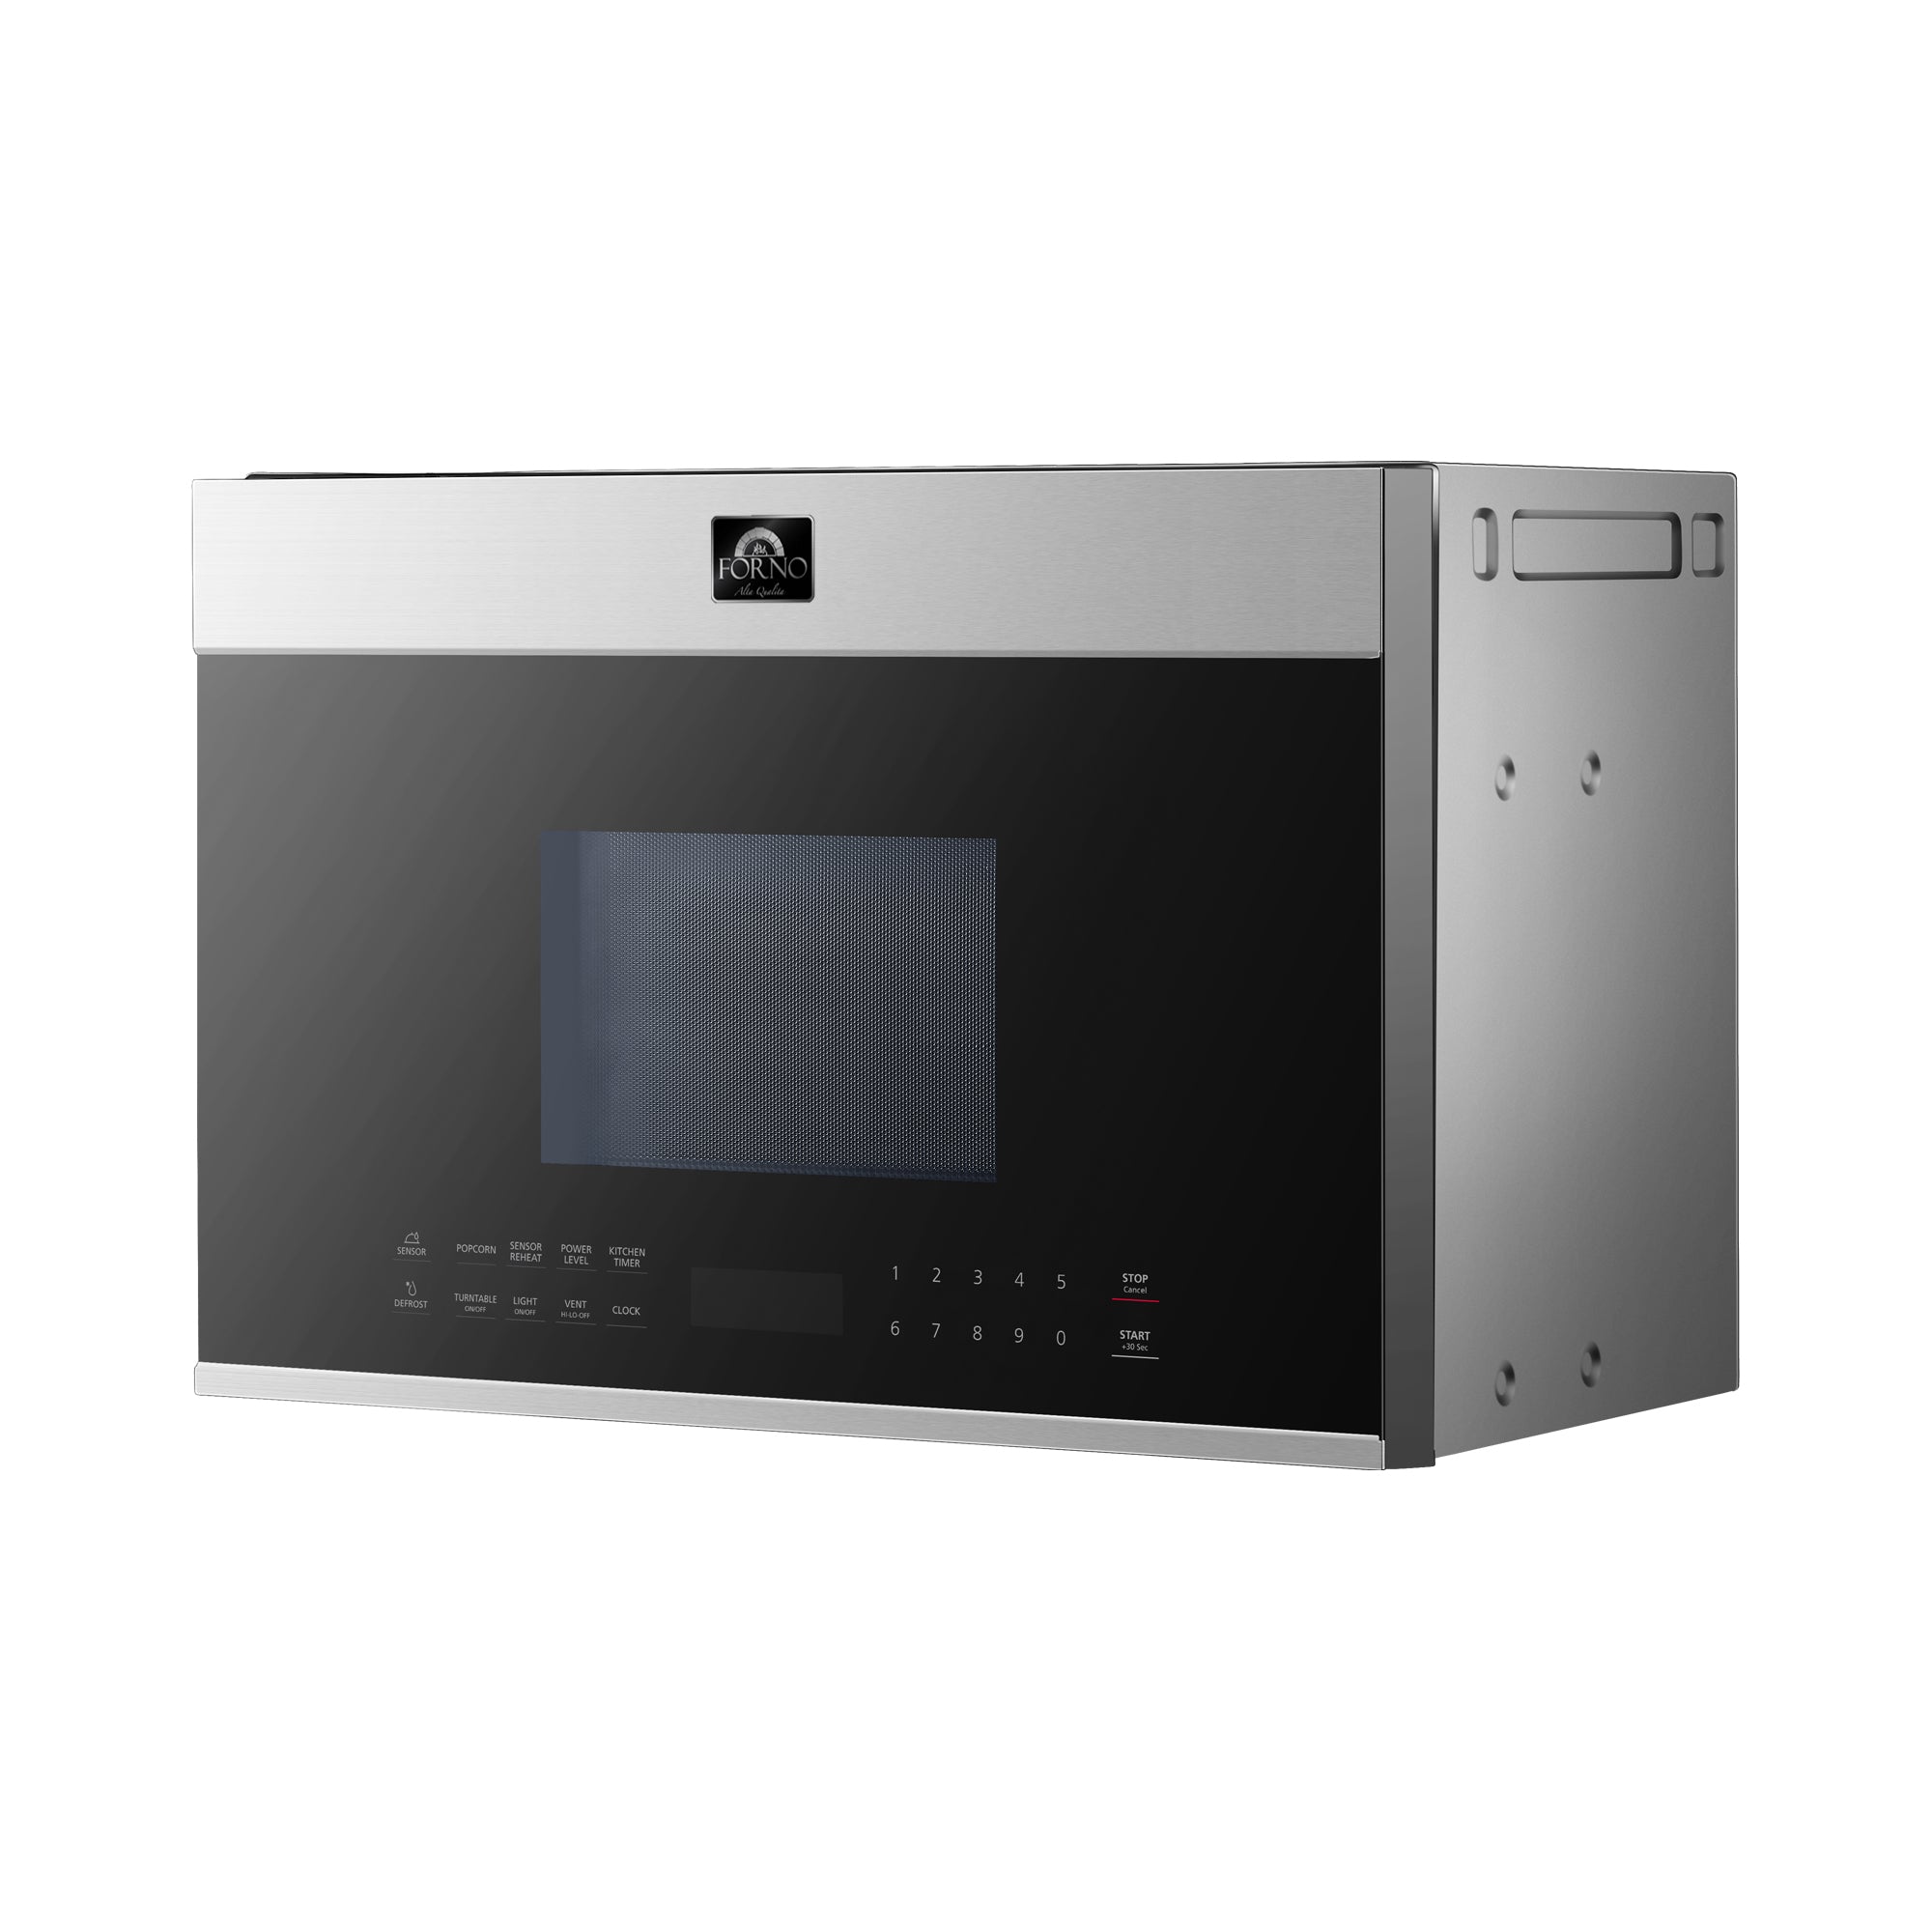 Forno Capriolo 24″ OTR Stainless Steel Microwave Oven 1.3 cu.ft. - FOTR3079-24